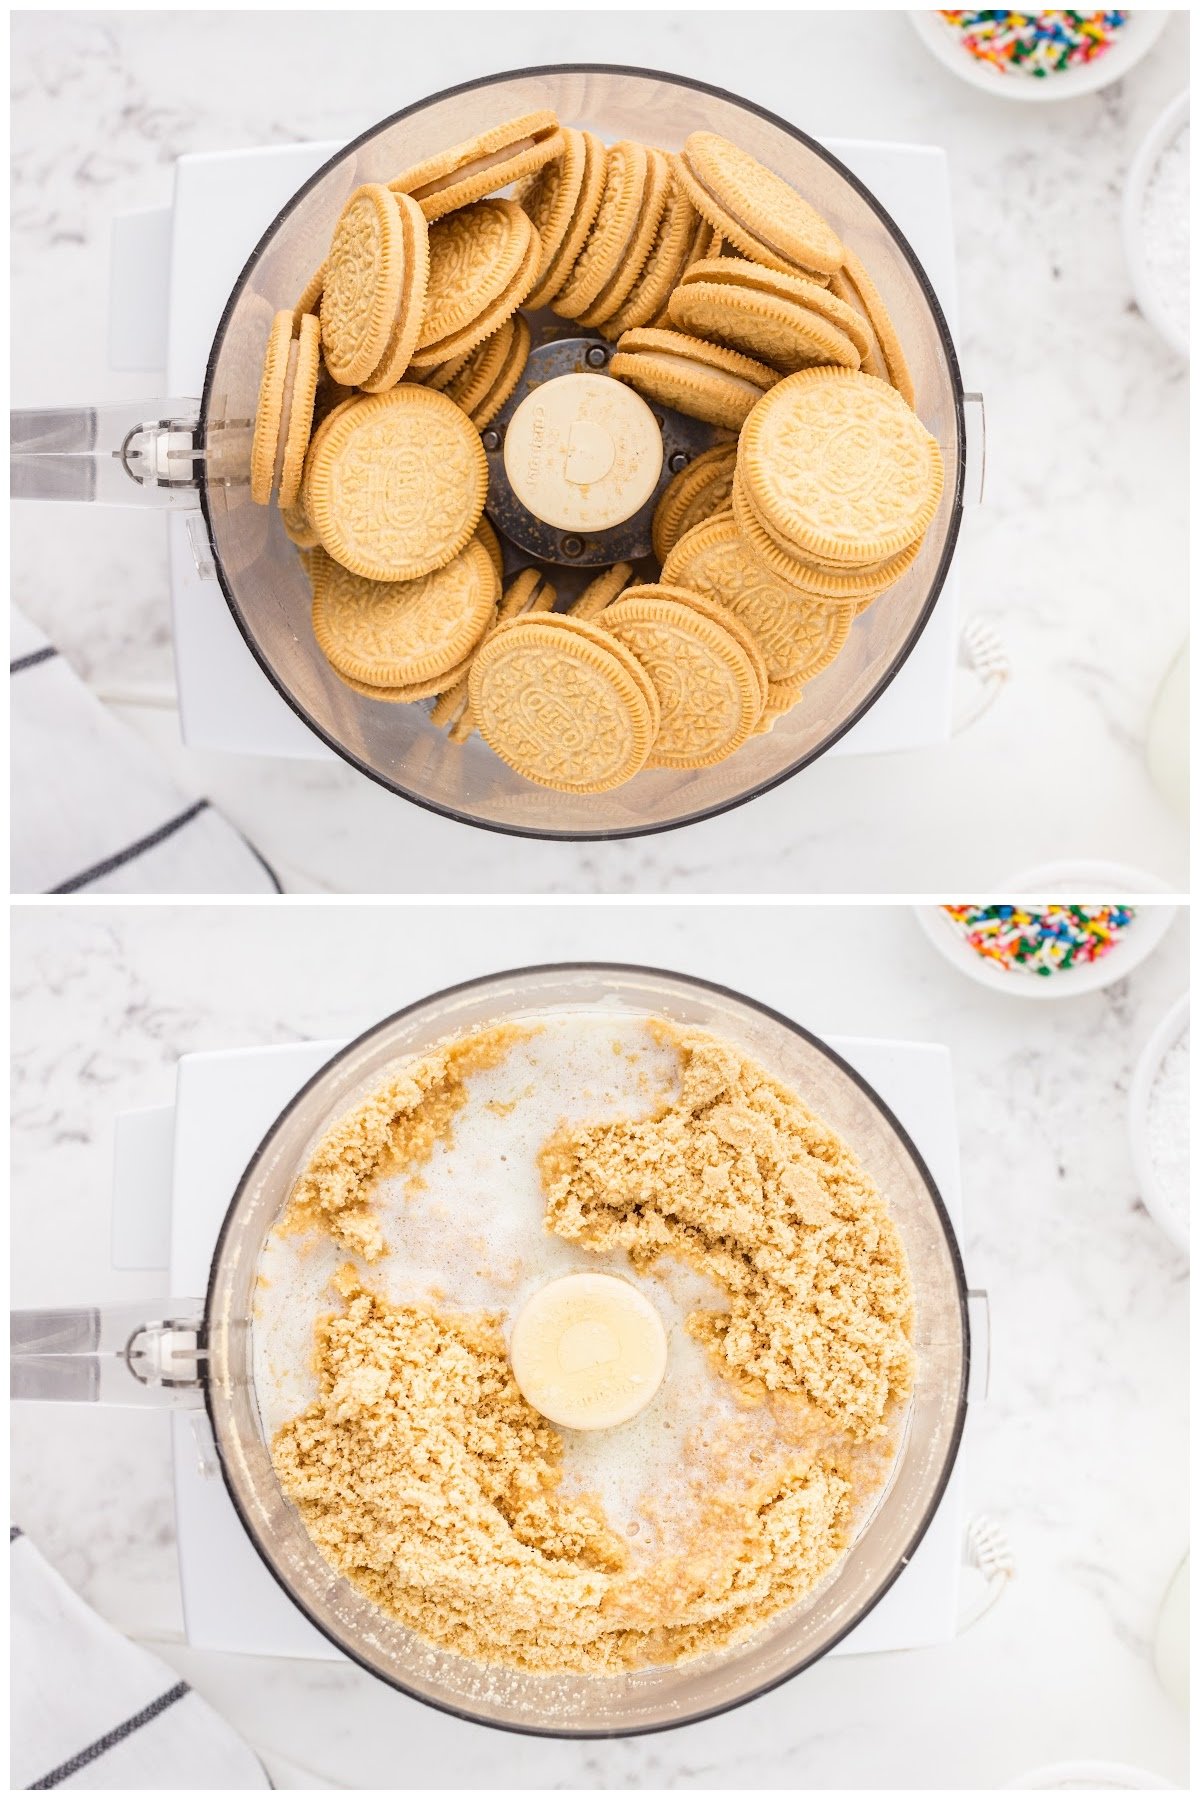 Two steps shown here to make the crust for the cake.  Vanilla cookies being crushed in a food processor and melted butter added after.